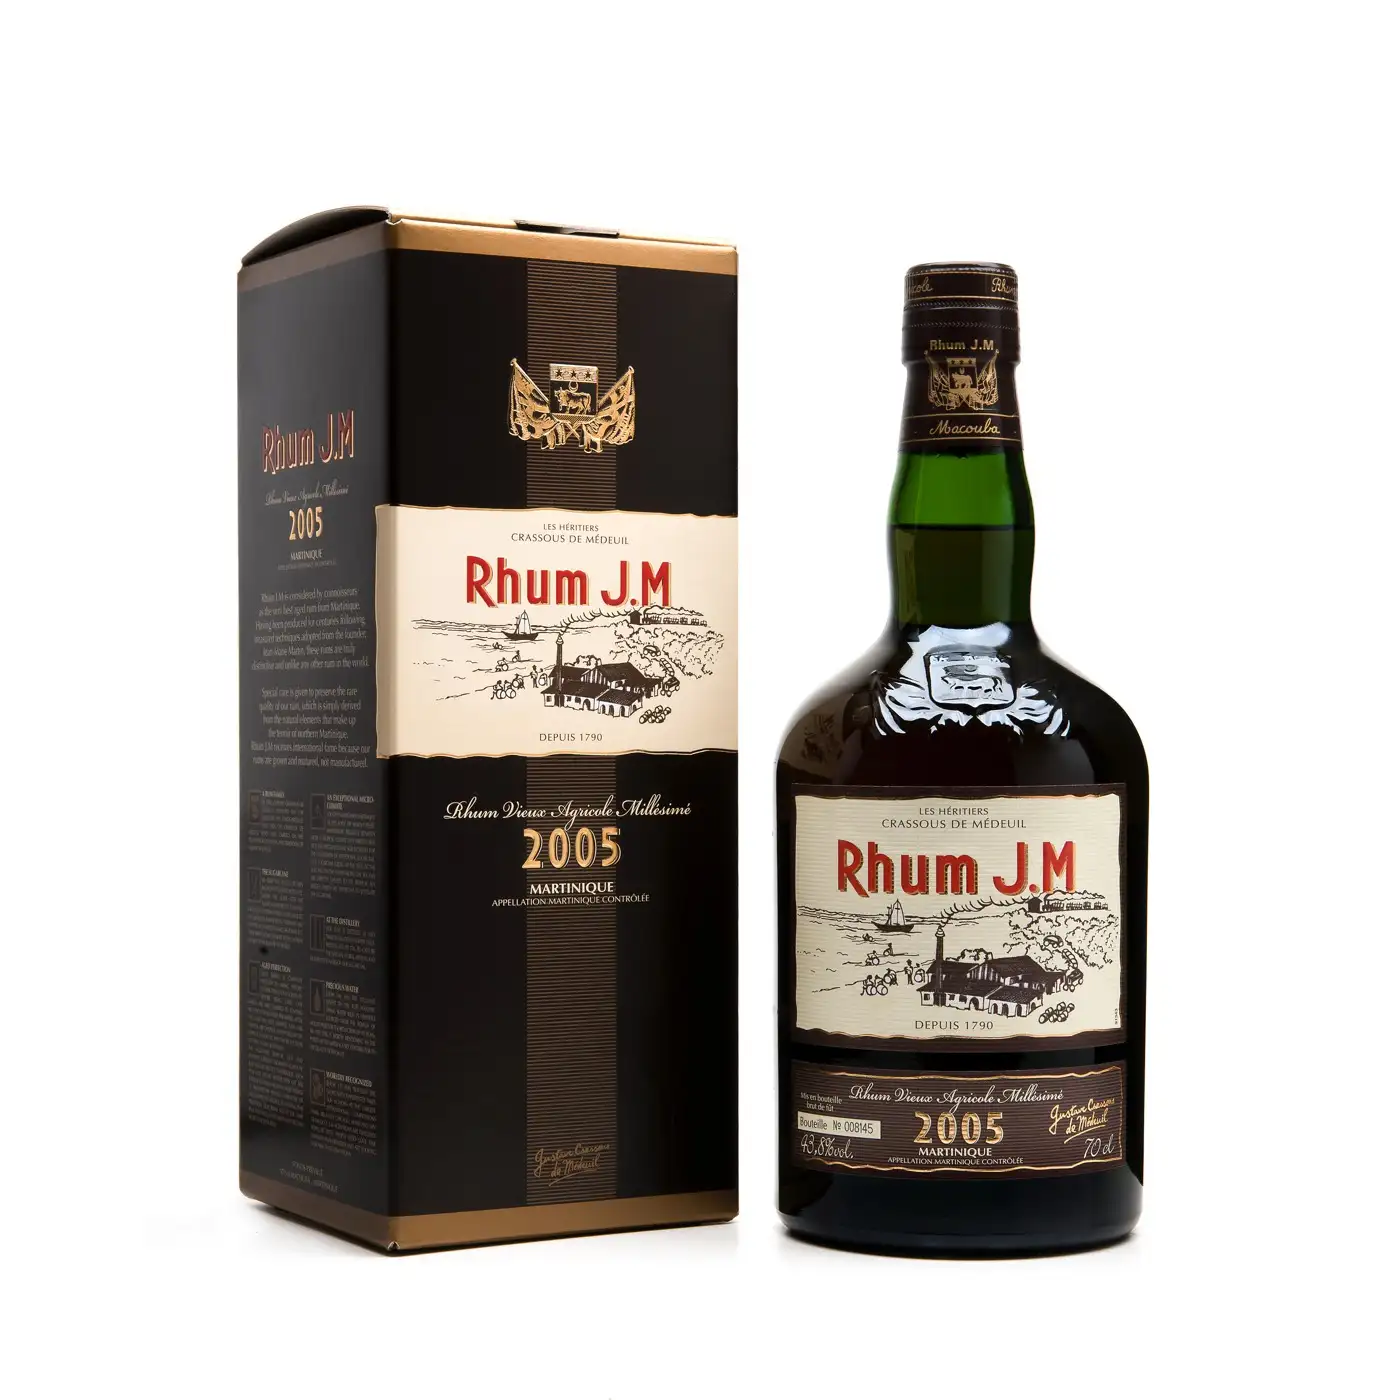 Image of the front of the bottle of the rum 2005